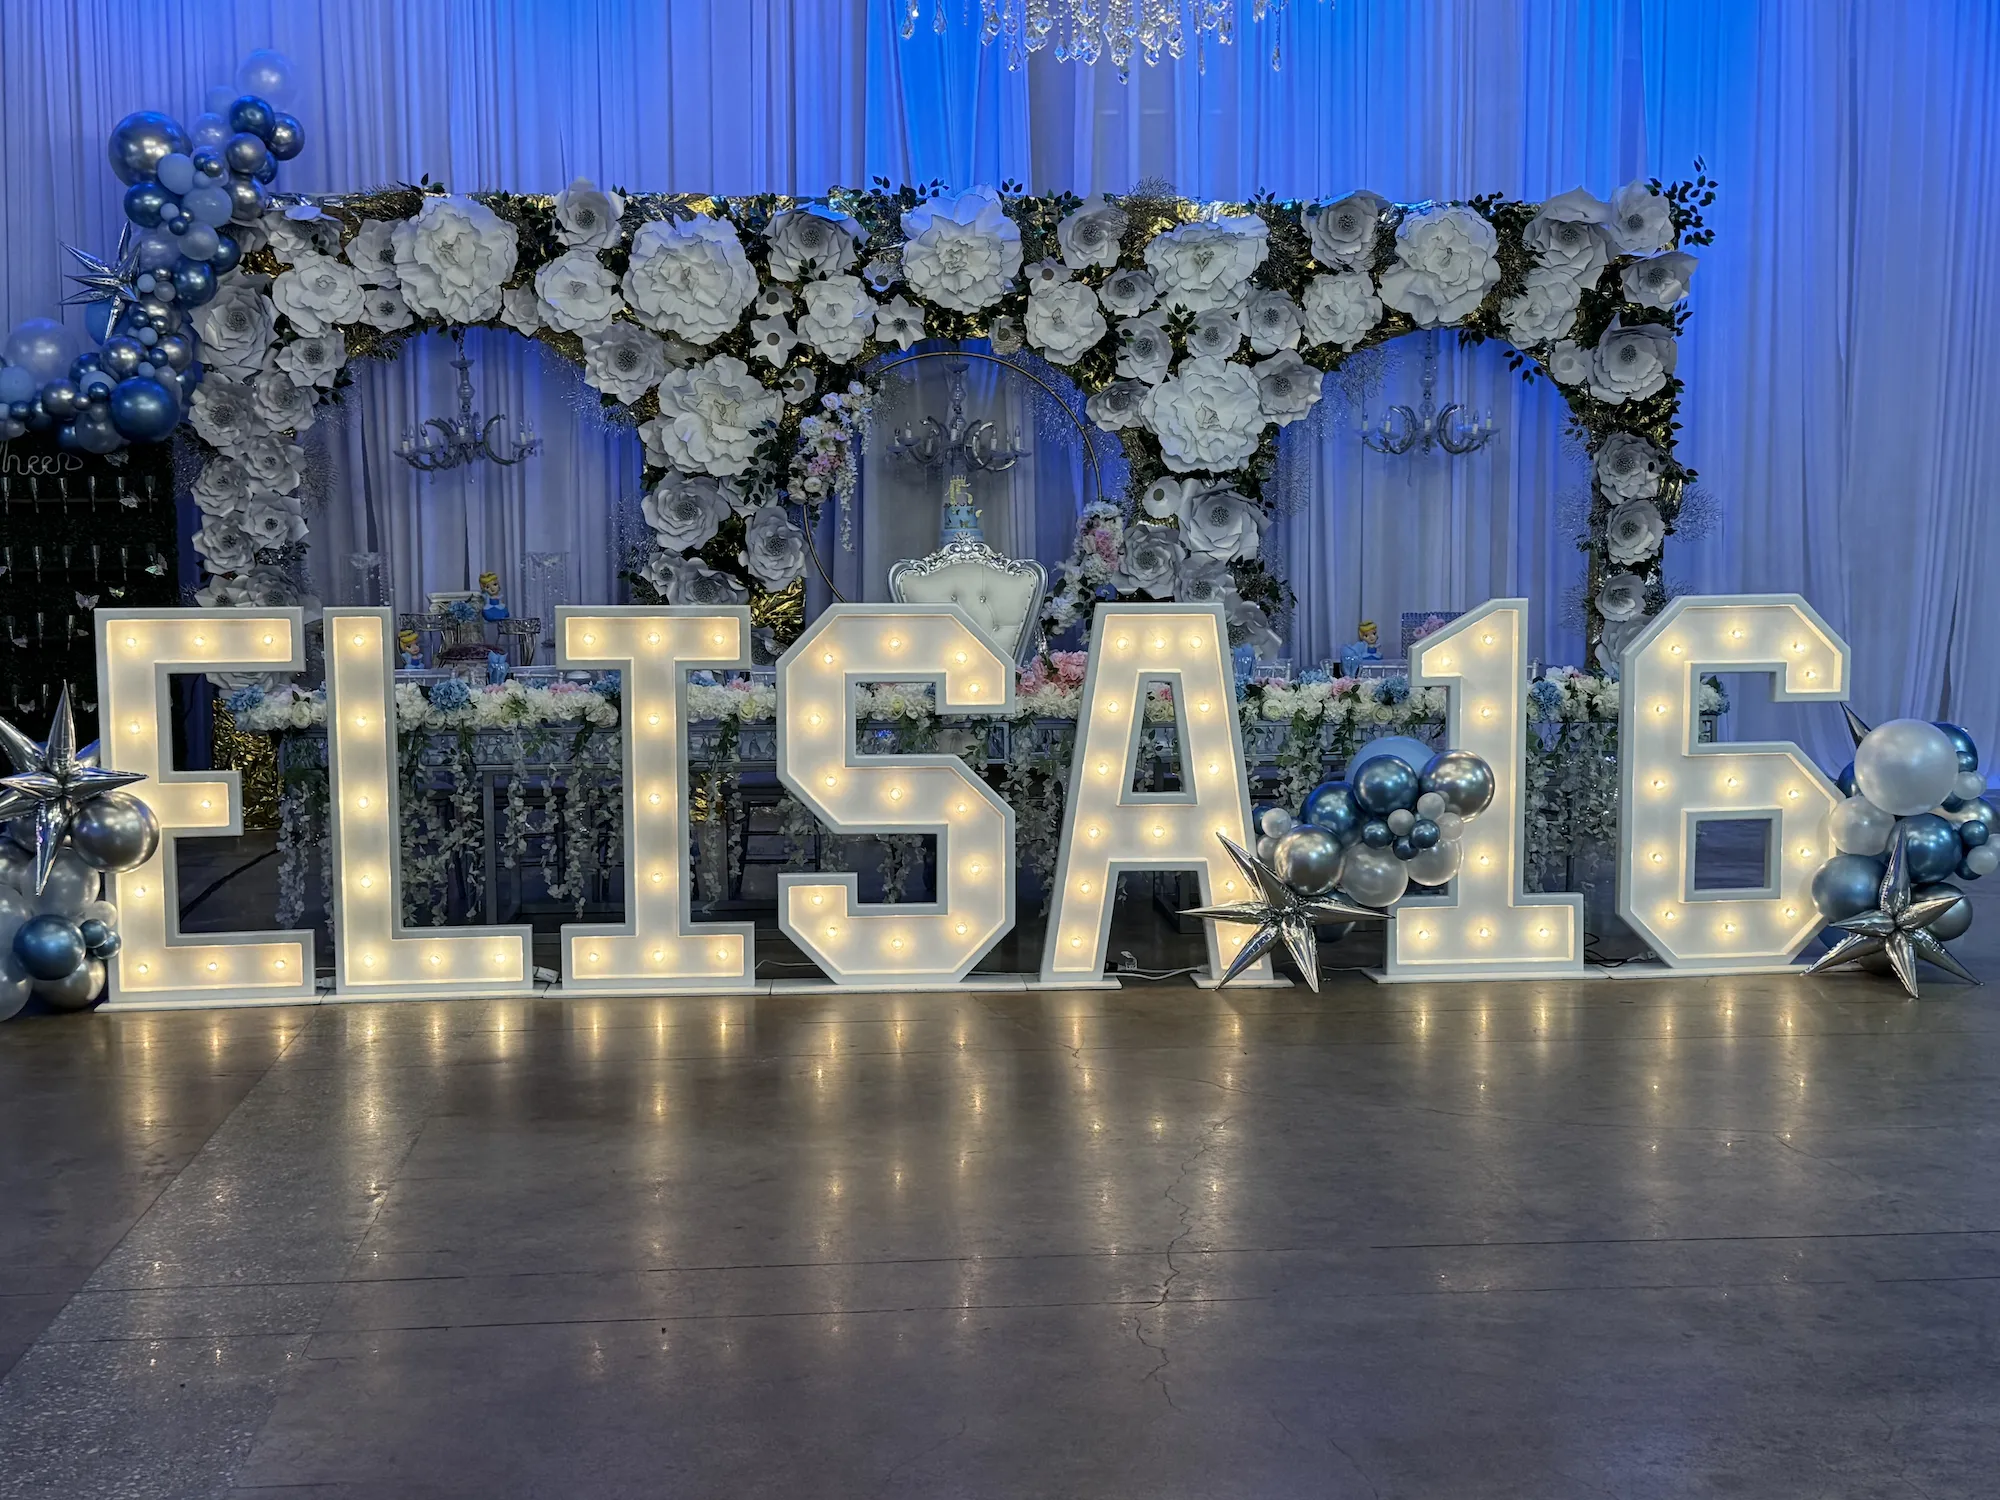 Esmys Events Marquee Letters